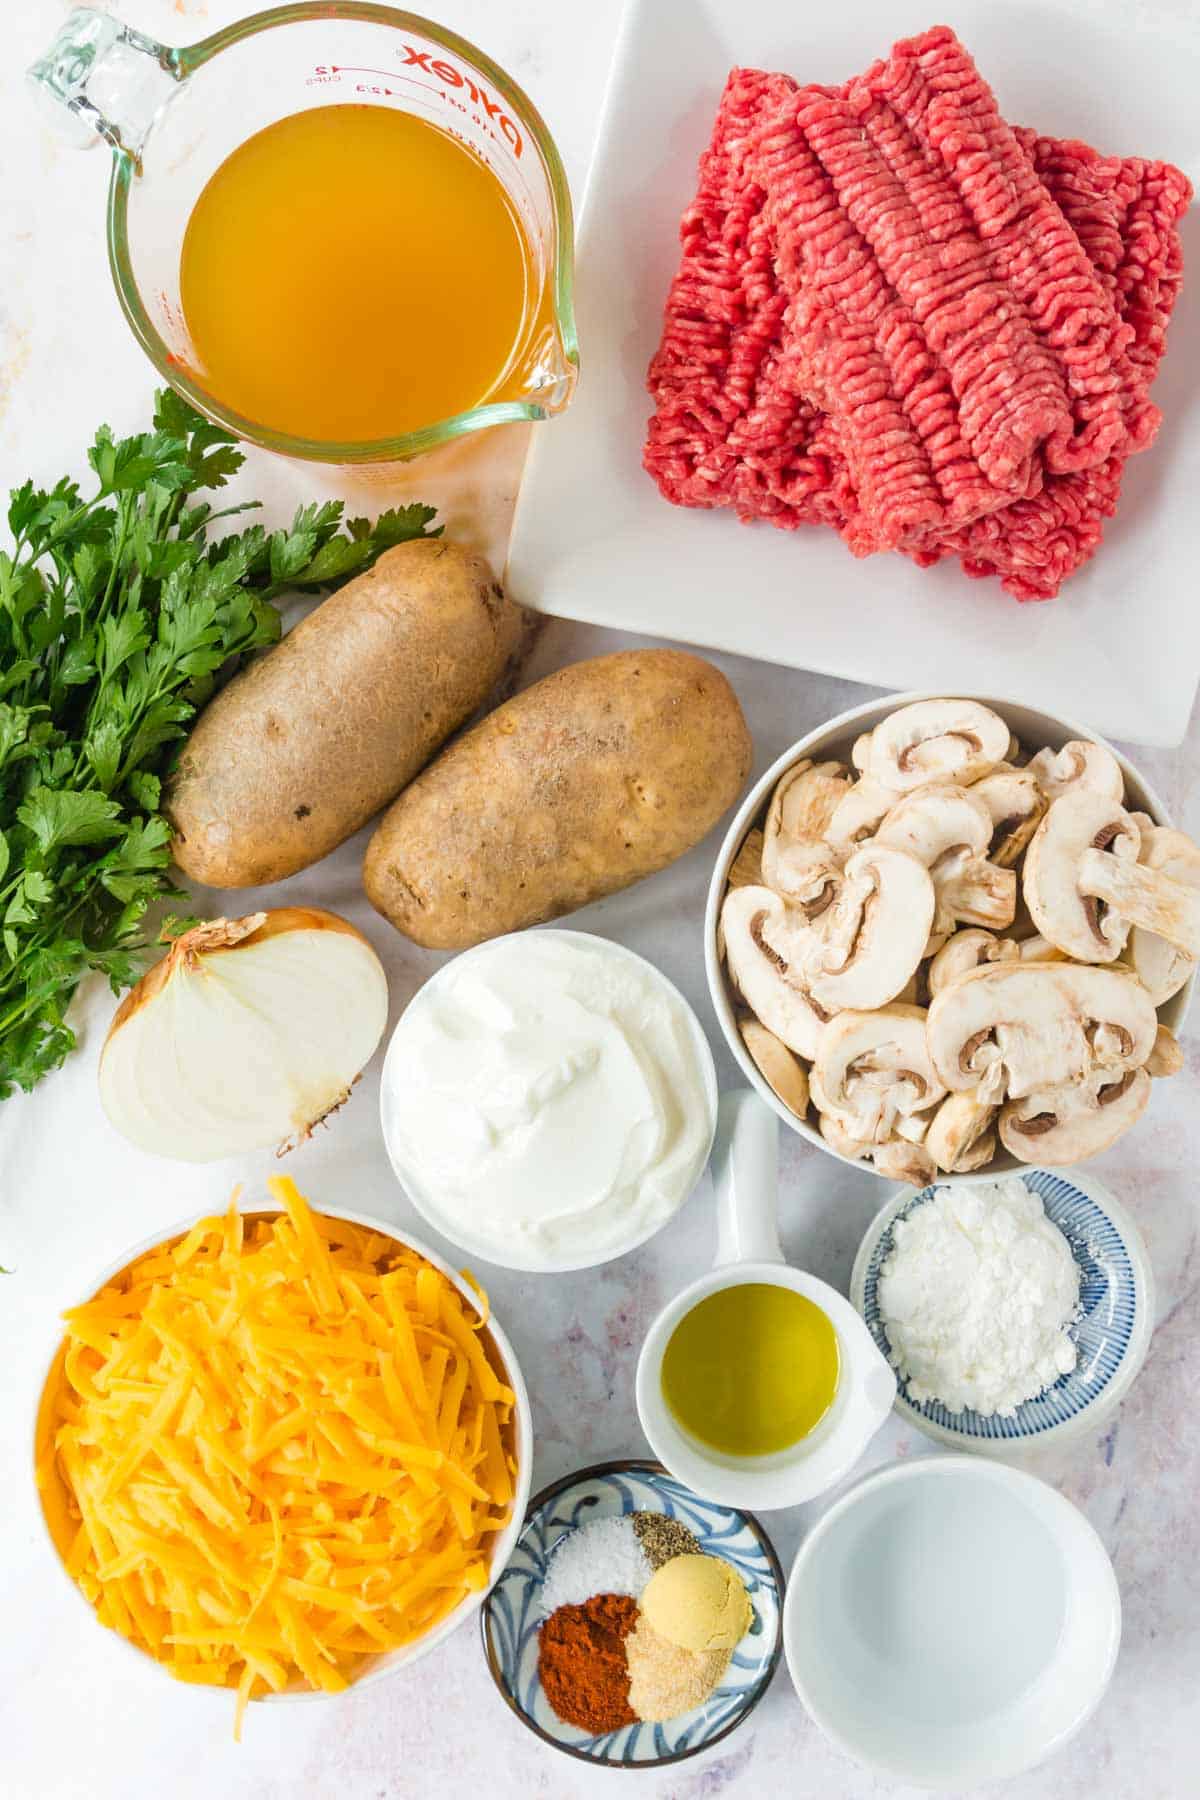 Ingredients to make the ground beef and potatoes skillet meal on a countertop.